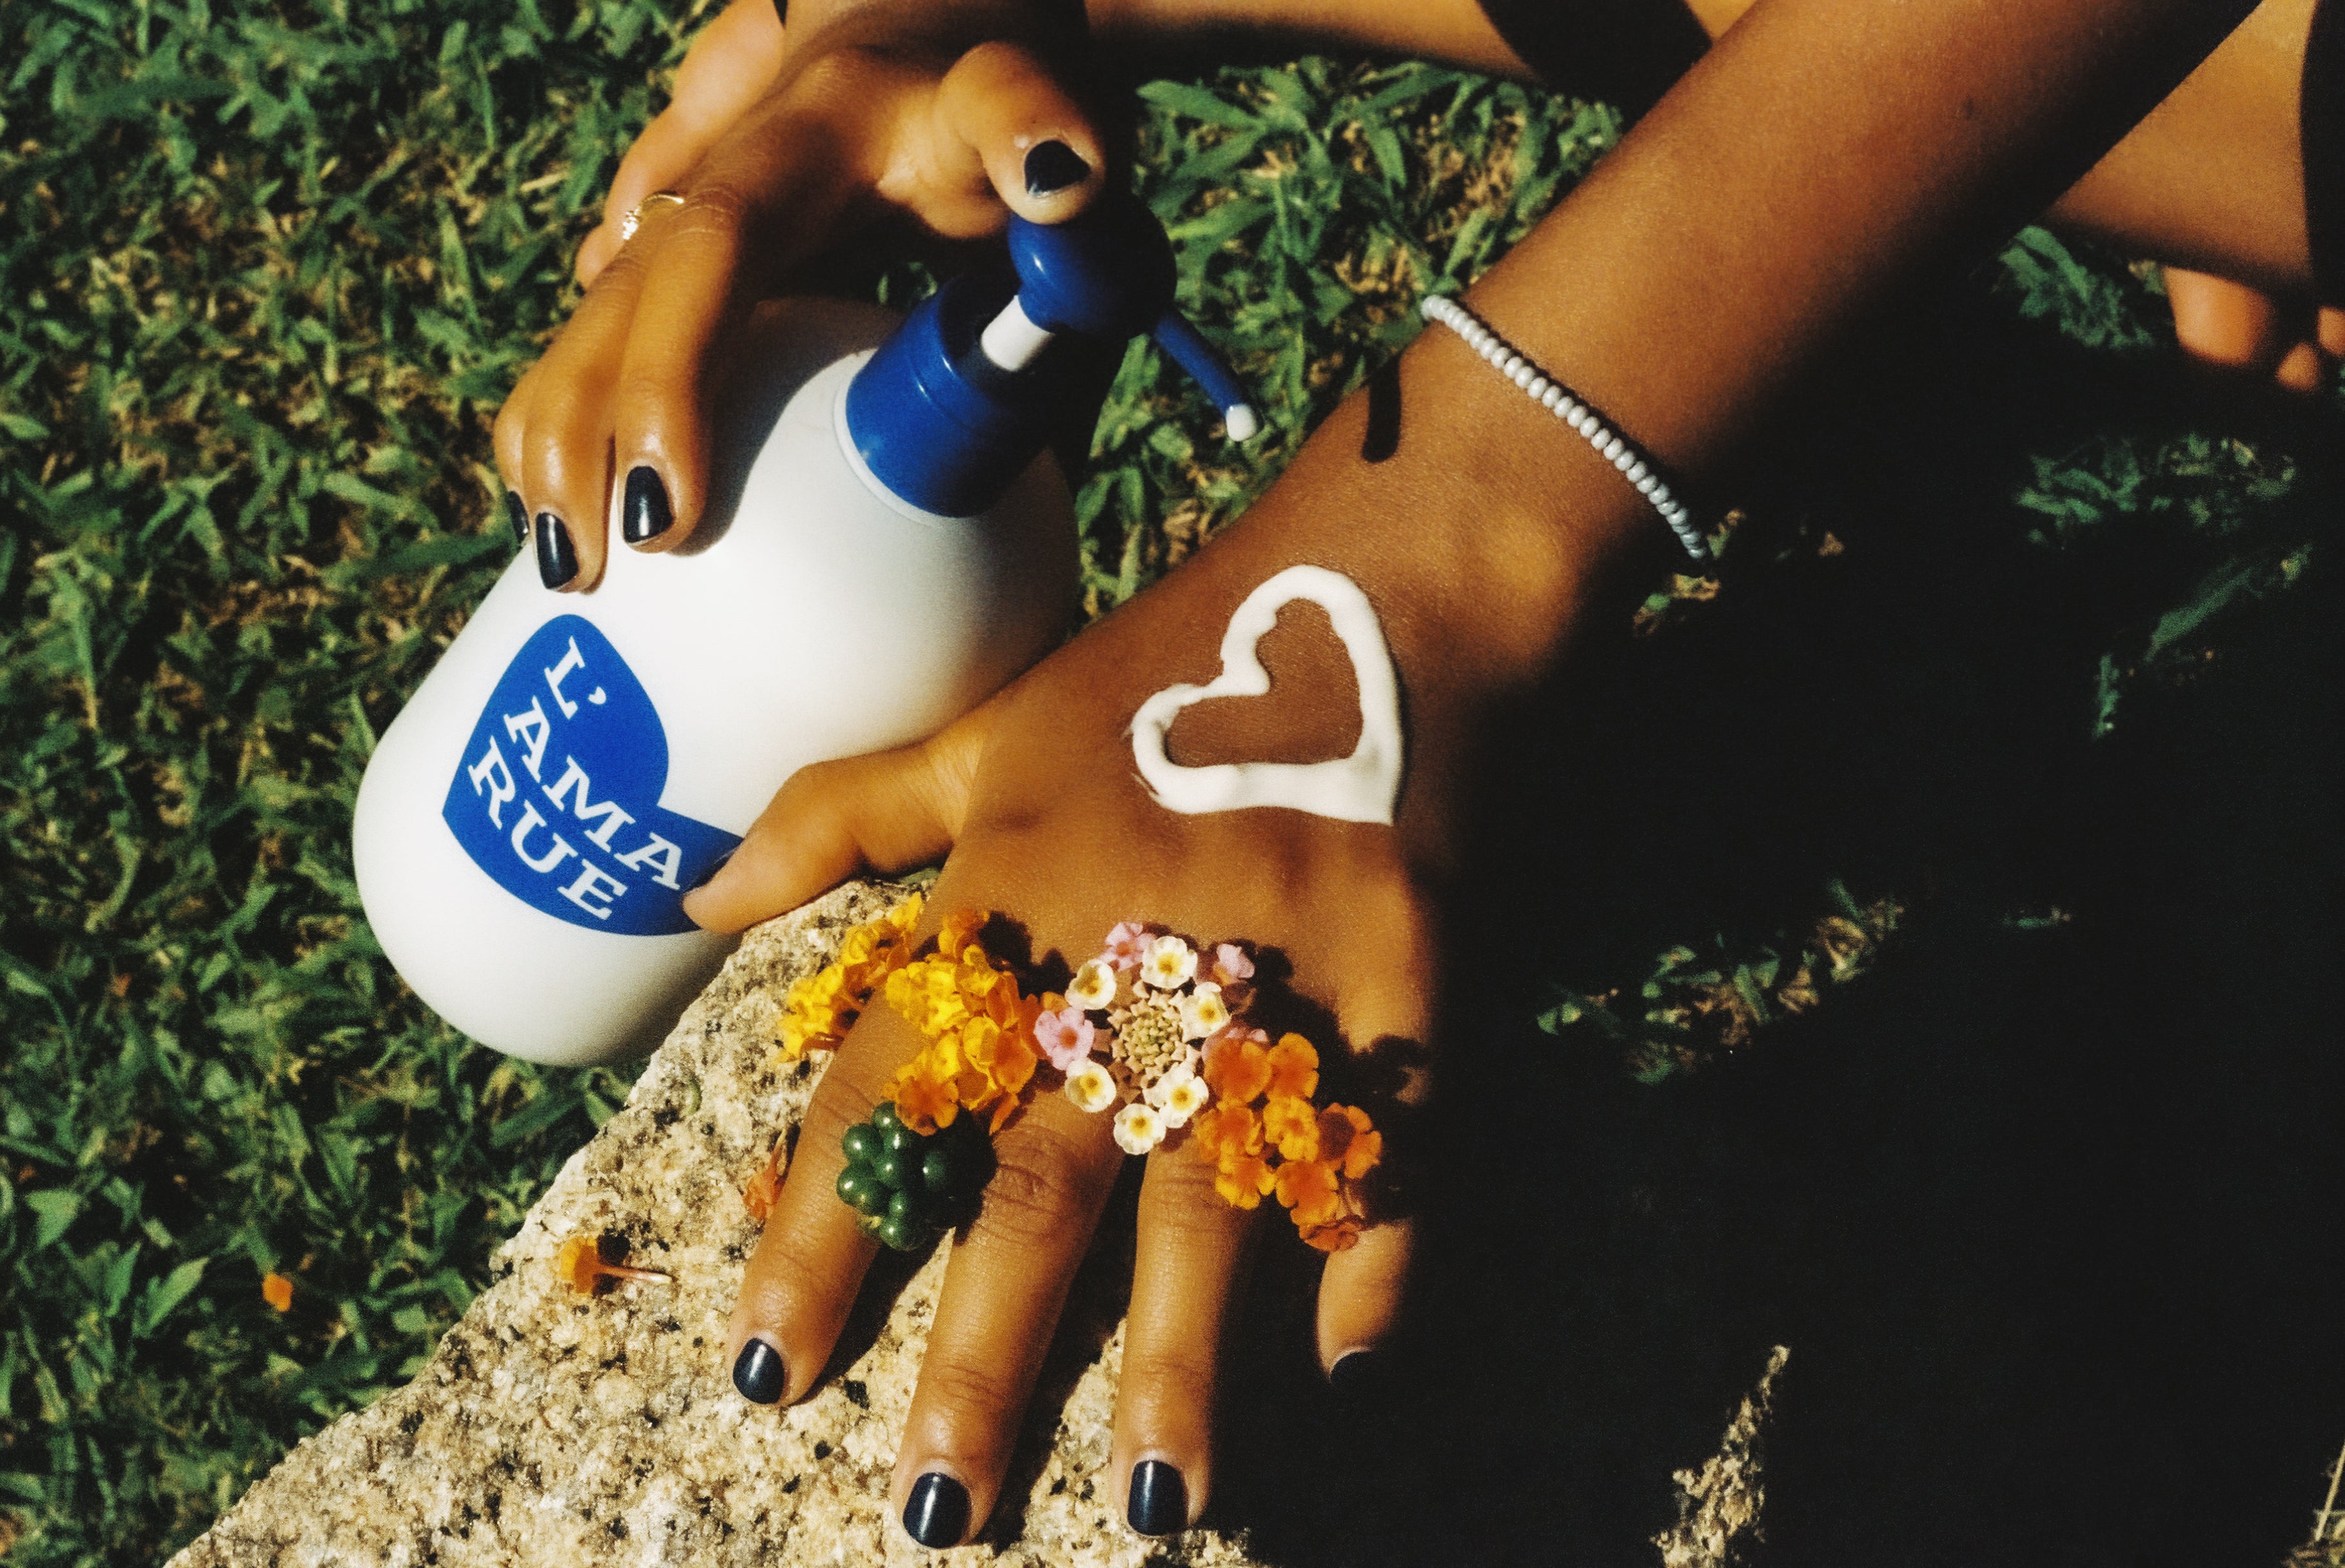 Two hands with flower decorations and sunscreen cream shaped as a heart on one hand.